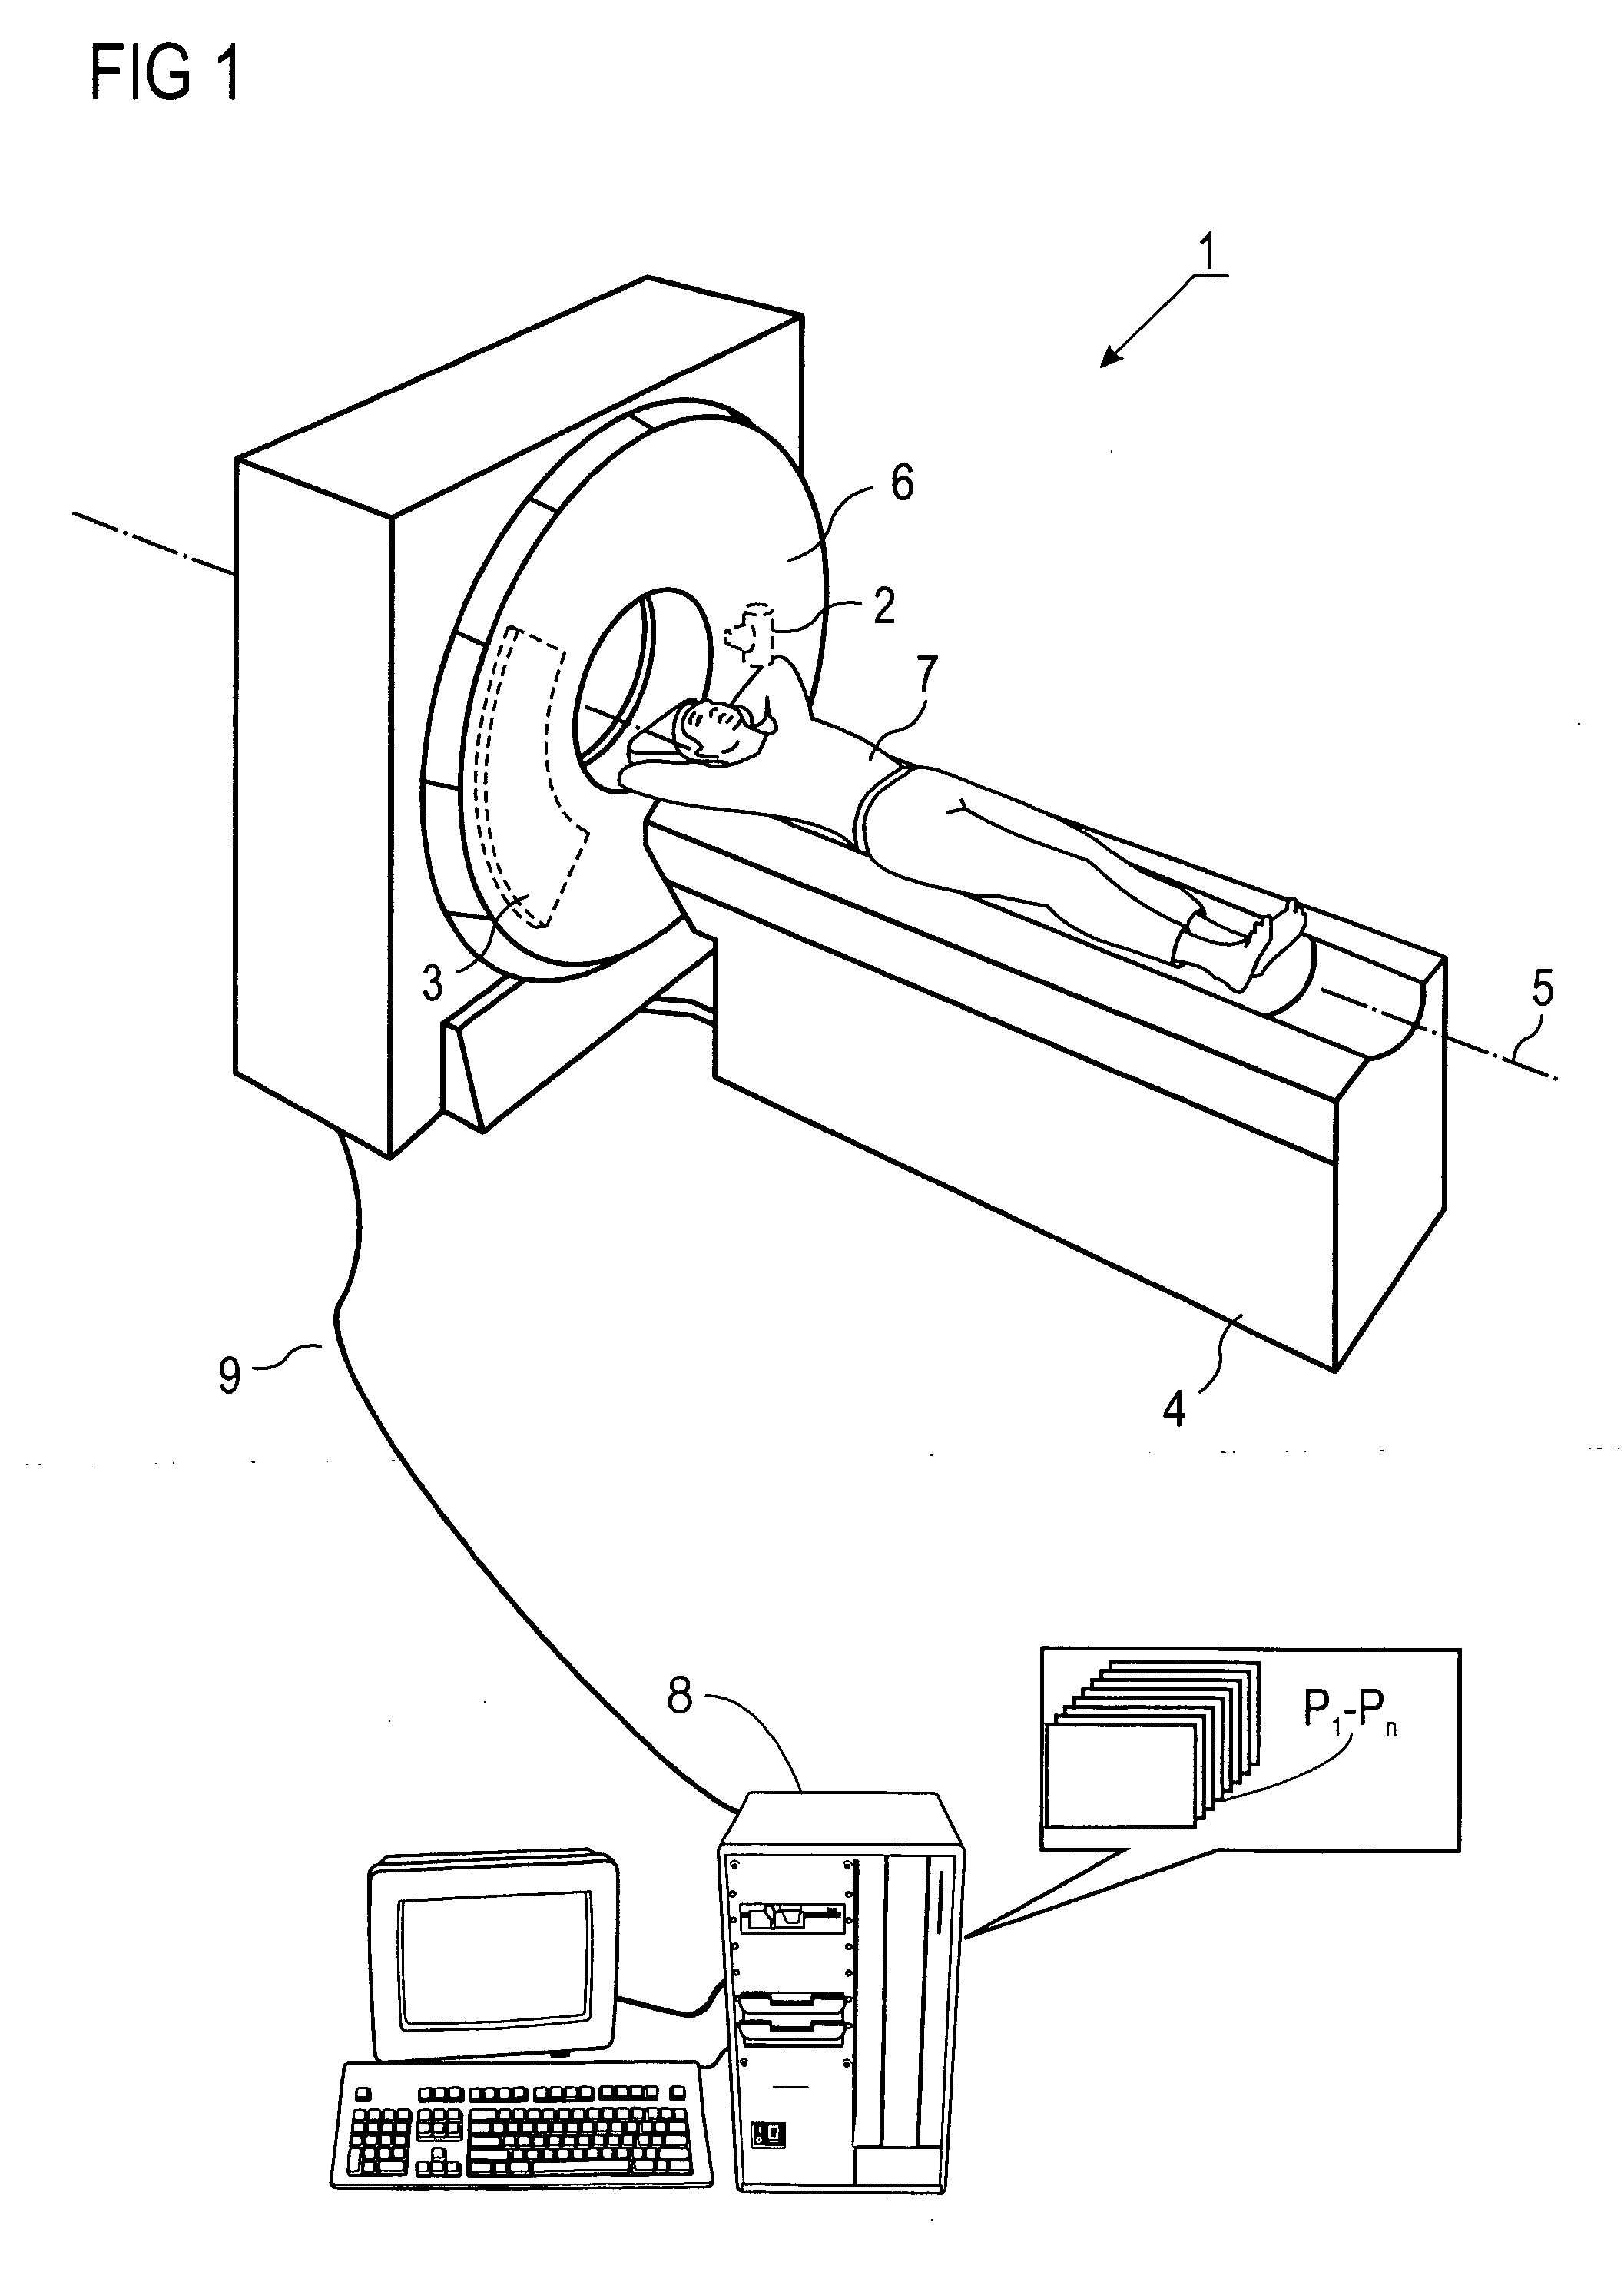 Method for planning the radiation therapy for a patient